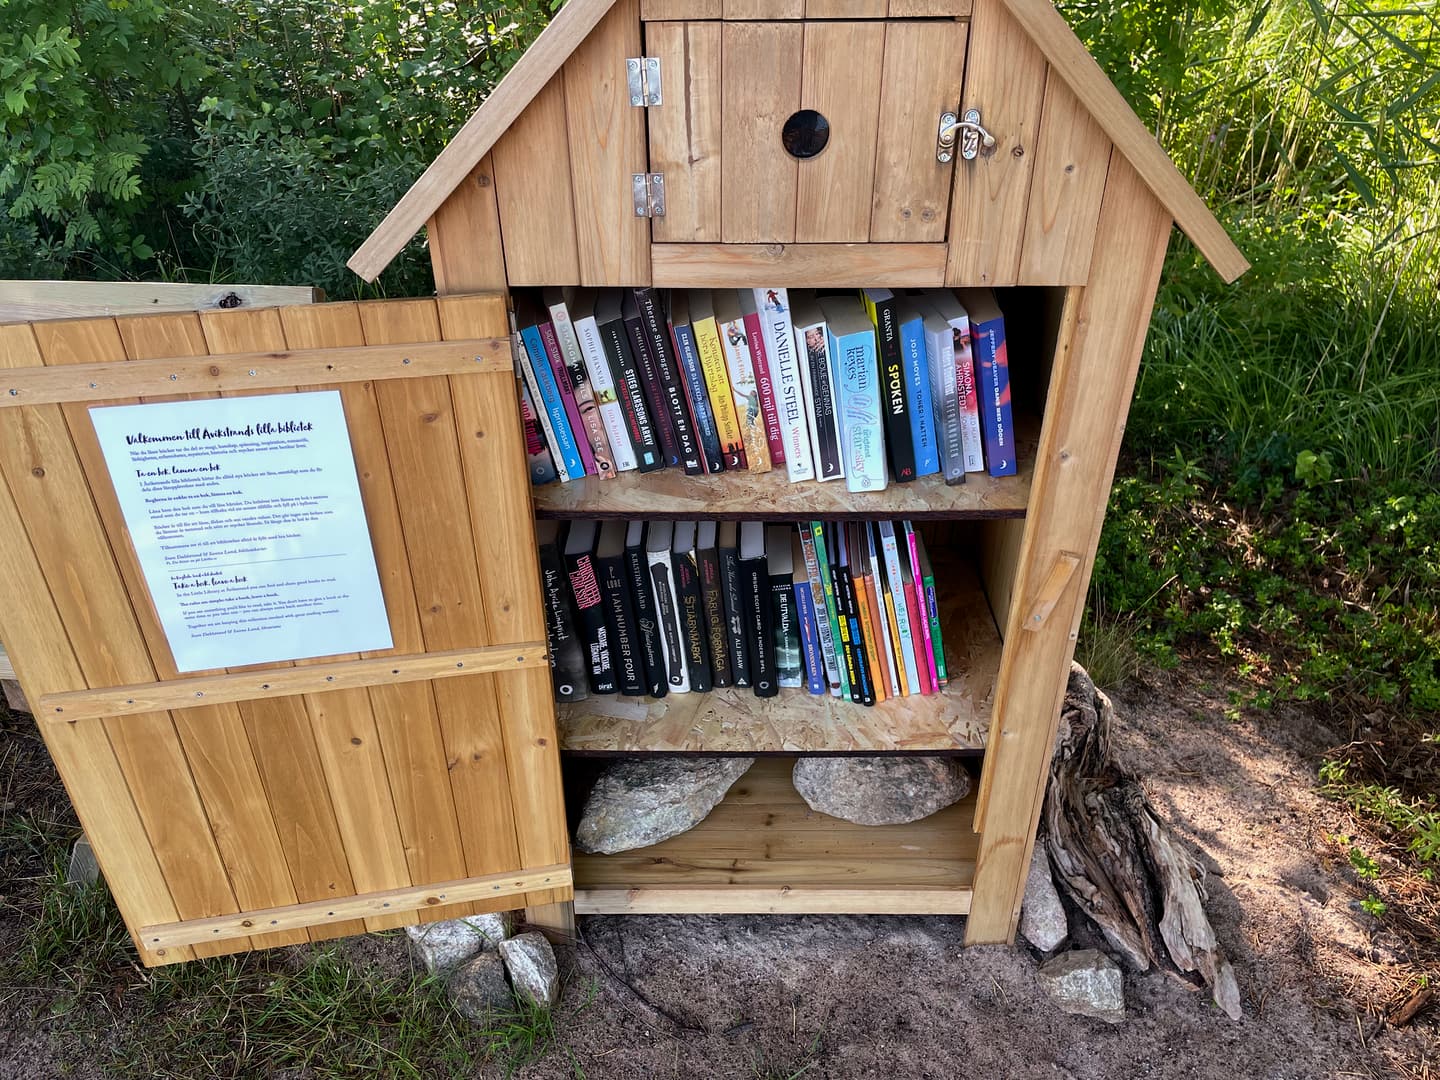 A tiny shed at a beach with the door opened. Inside there are two shelves filled with books.